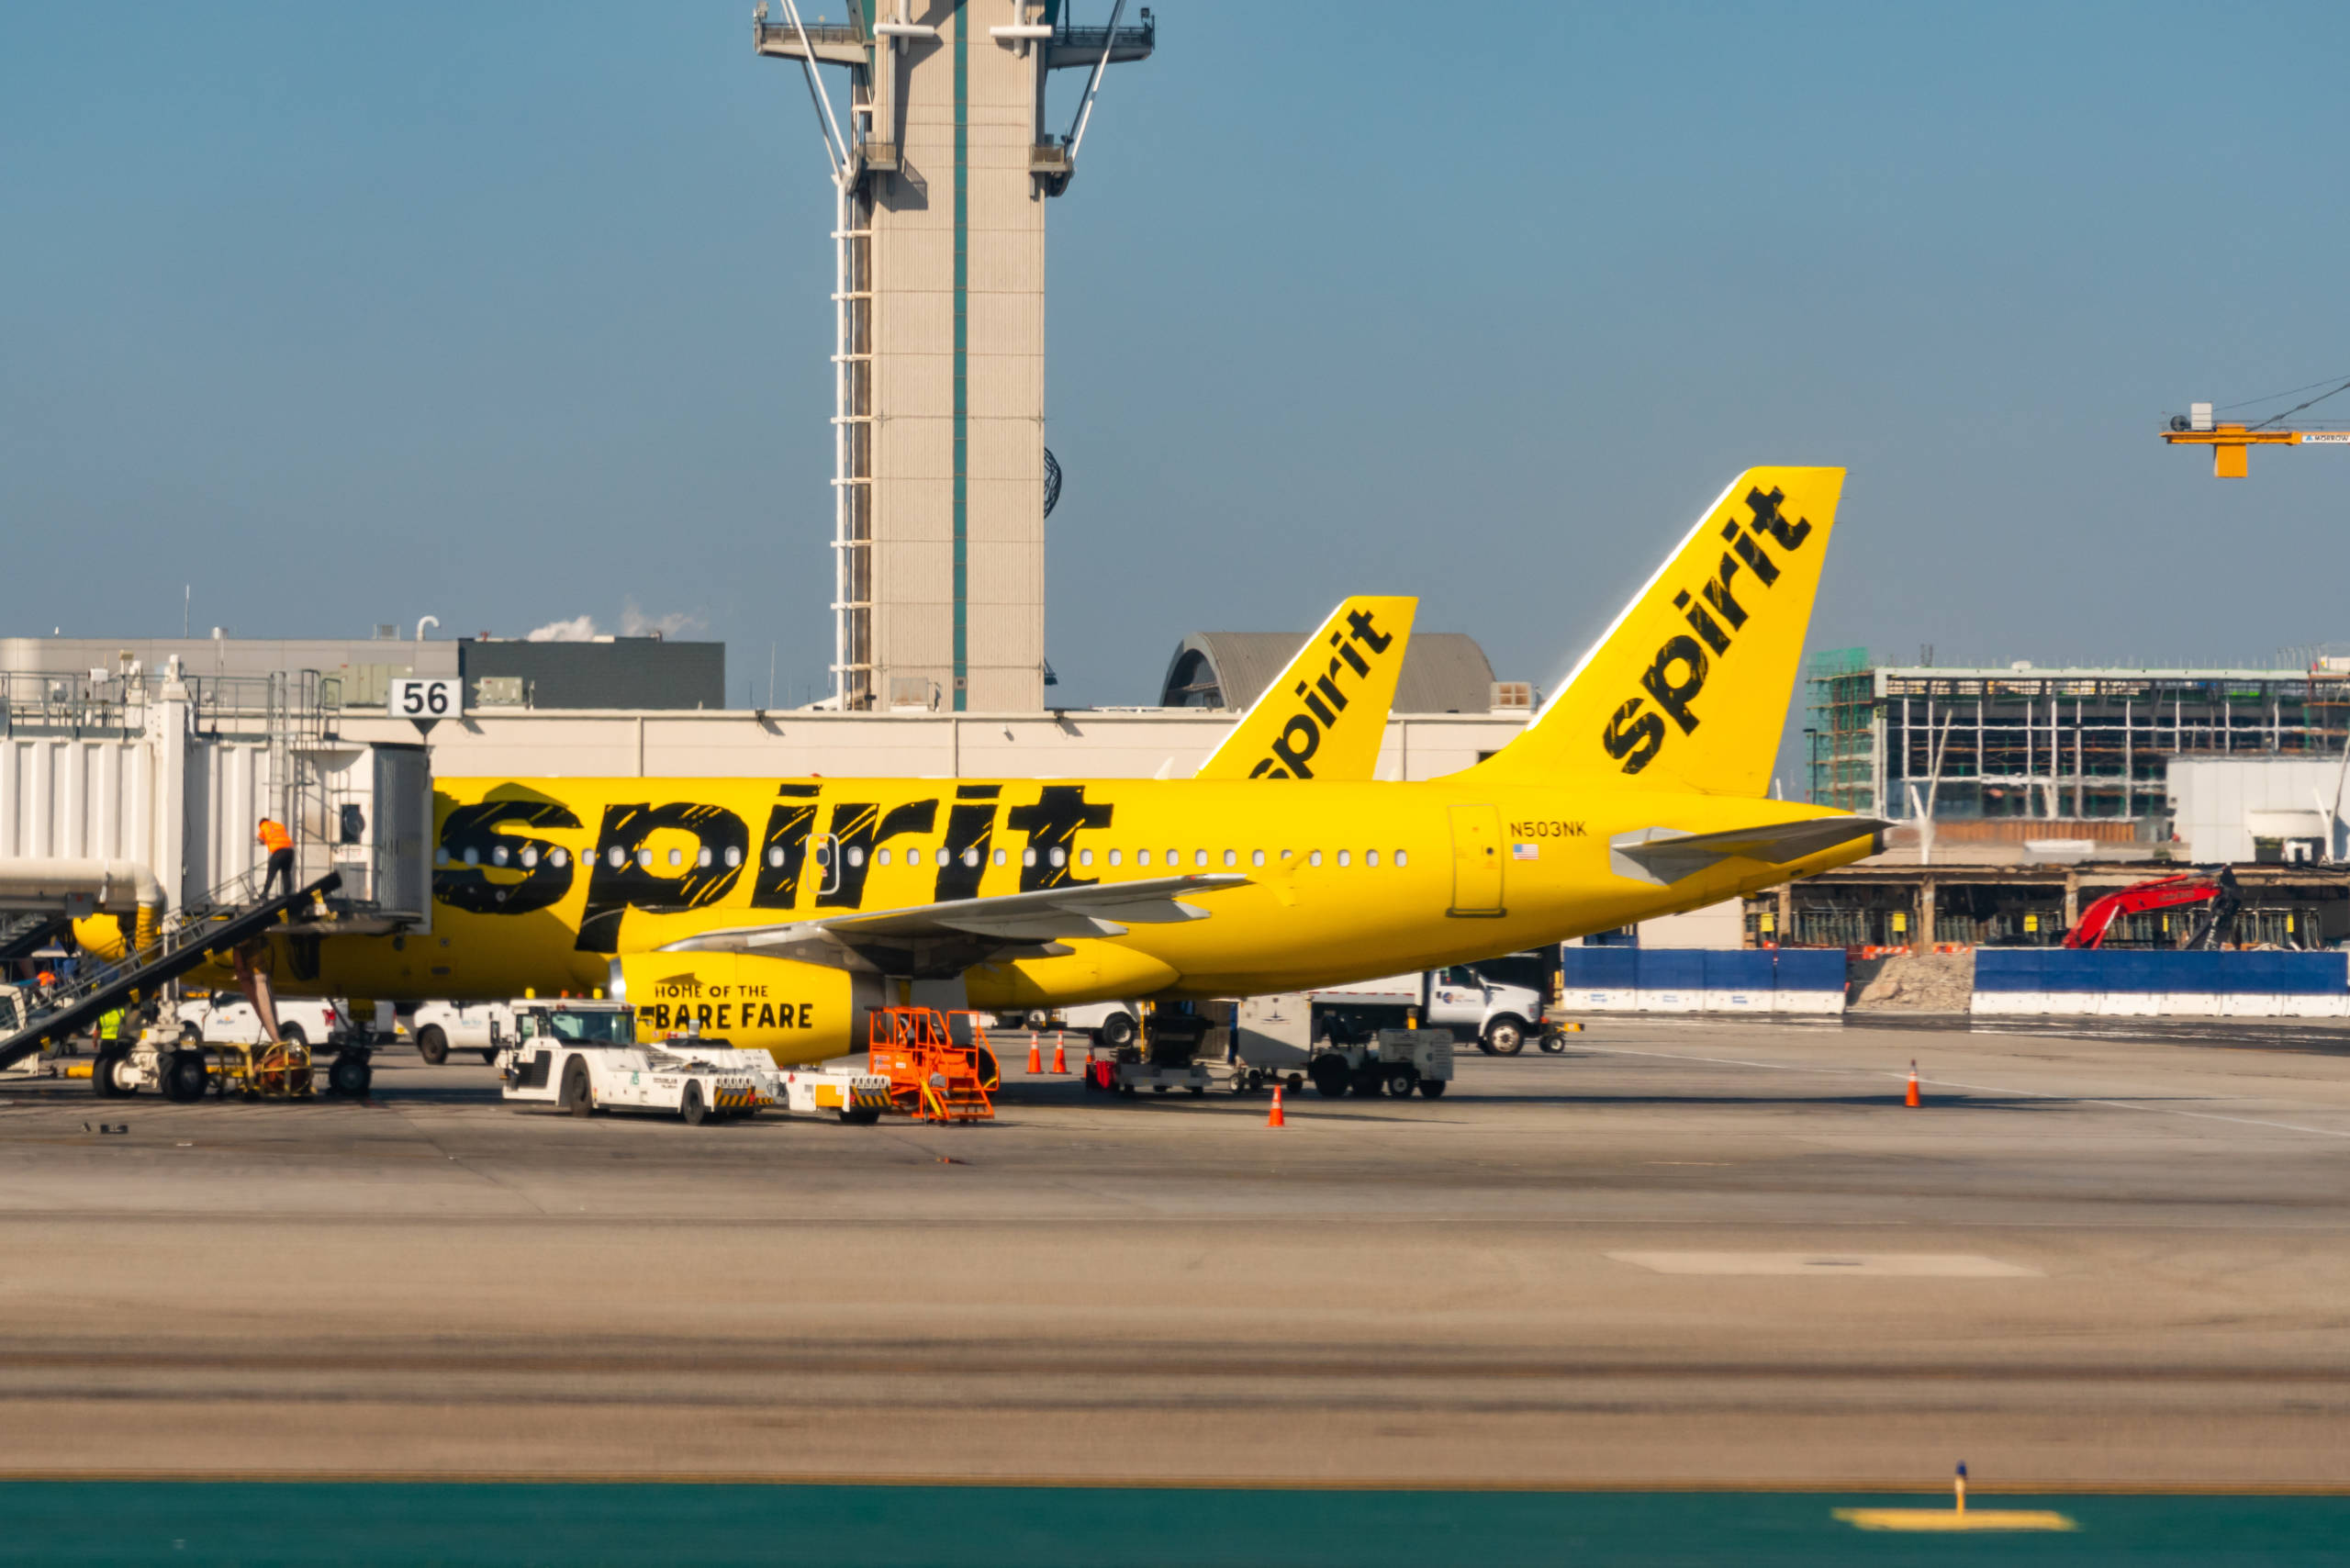 Spirit Airlines aircrafts seen at Los Angeles International